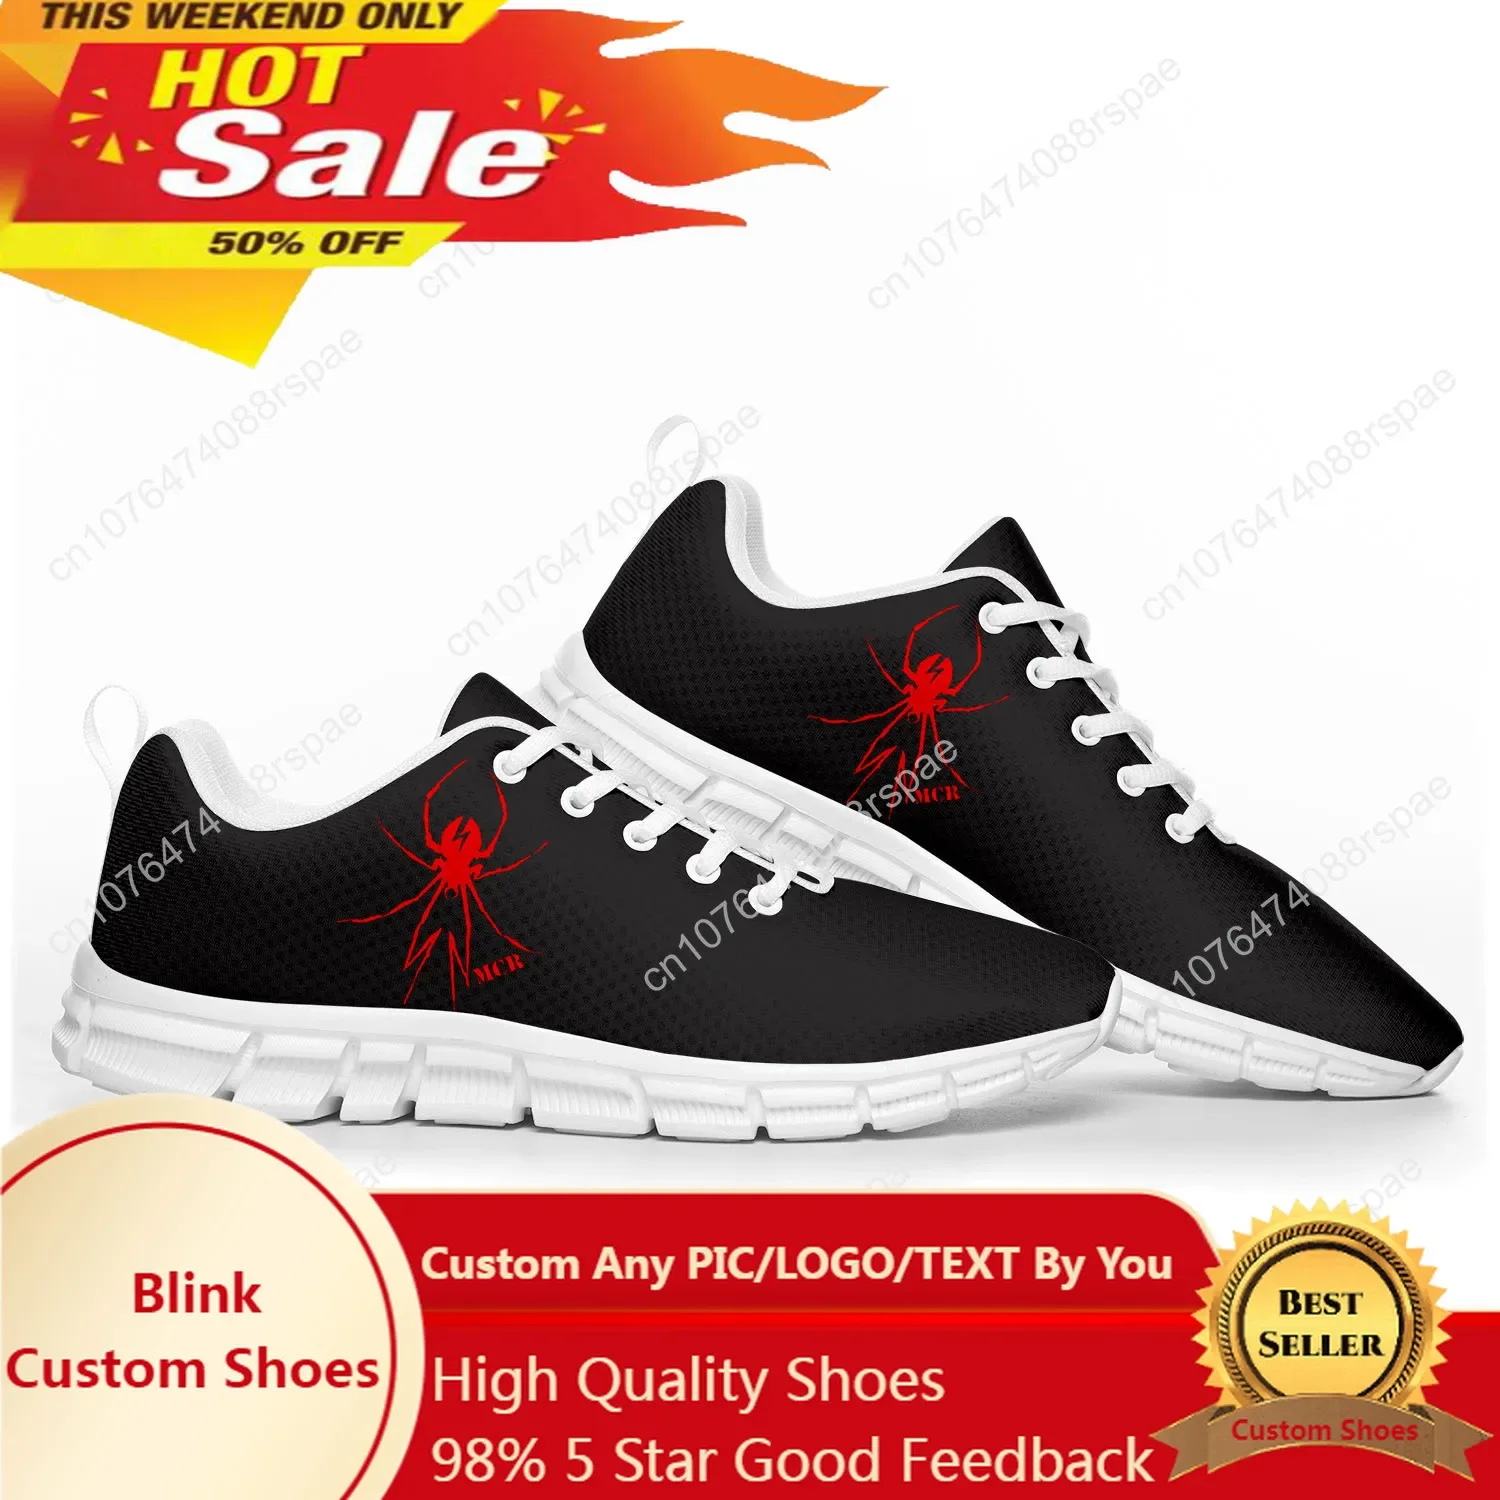 Romance Rock Band Chemical My Fashion Sports Shoes Mens Womens Teenager Kids Children Sneakers Custom High Quality Couple Shoes 2021 fashion disnye spiderman cool girls boys shoes light kids sneakers toddlers high quality sports comfortable children shoes